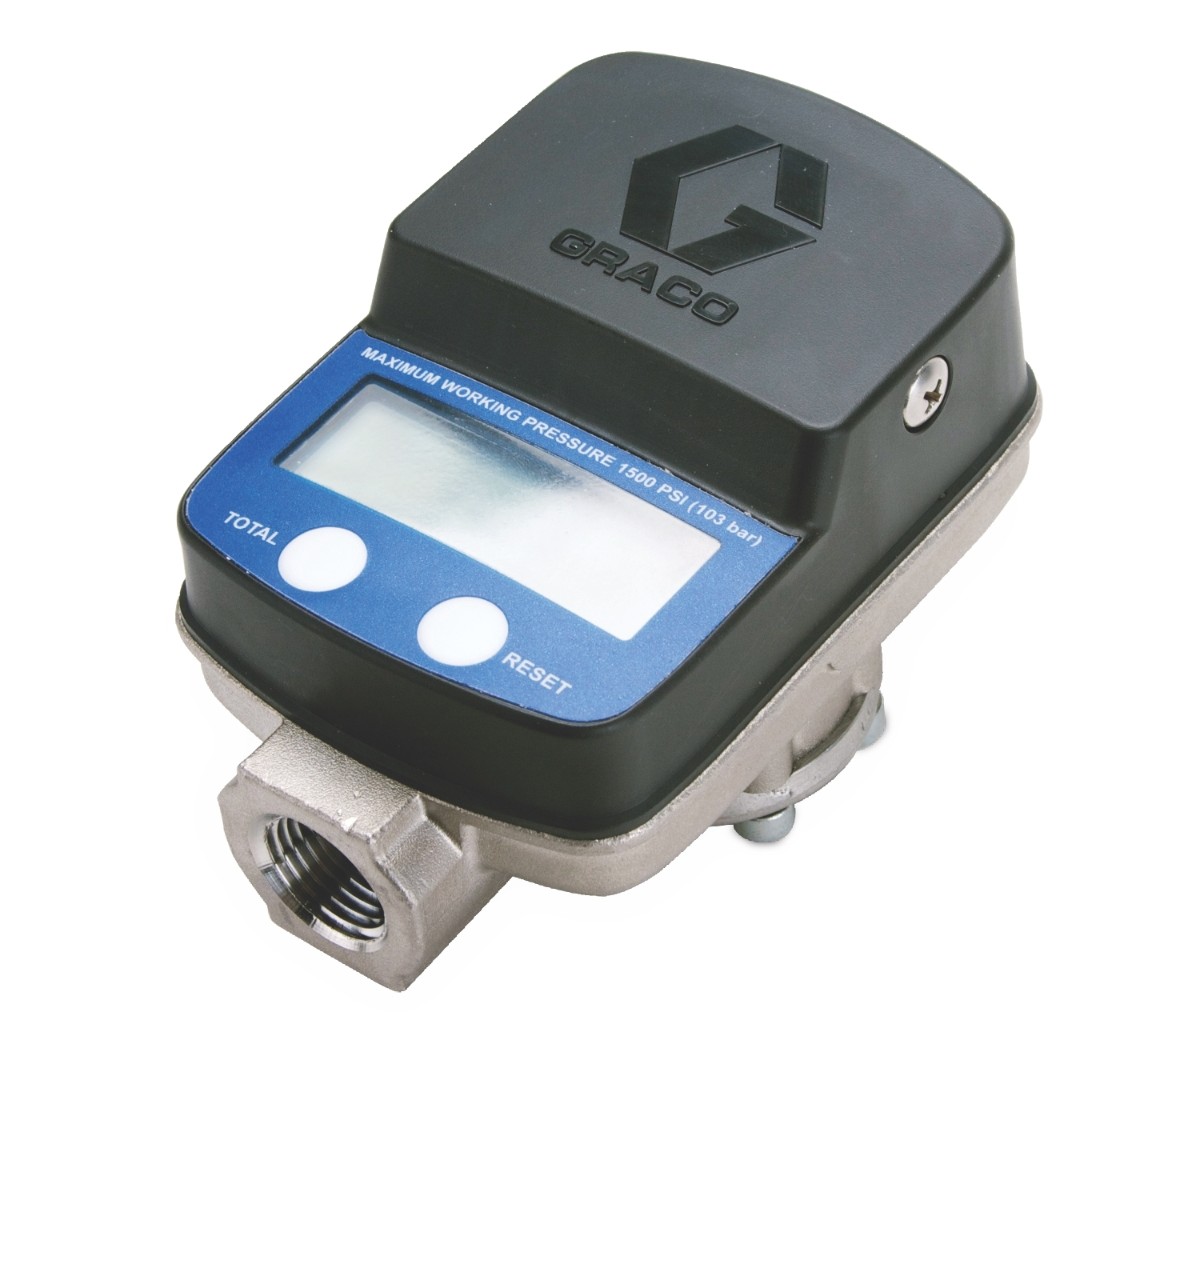 SDI15 Med/High Pressure, Med/High Flow In-Line Meter for Petroleum- and  Synthetic-Based Oils, Antifreeze, Windshield Washer Fluid